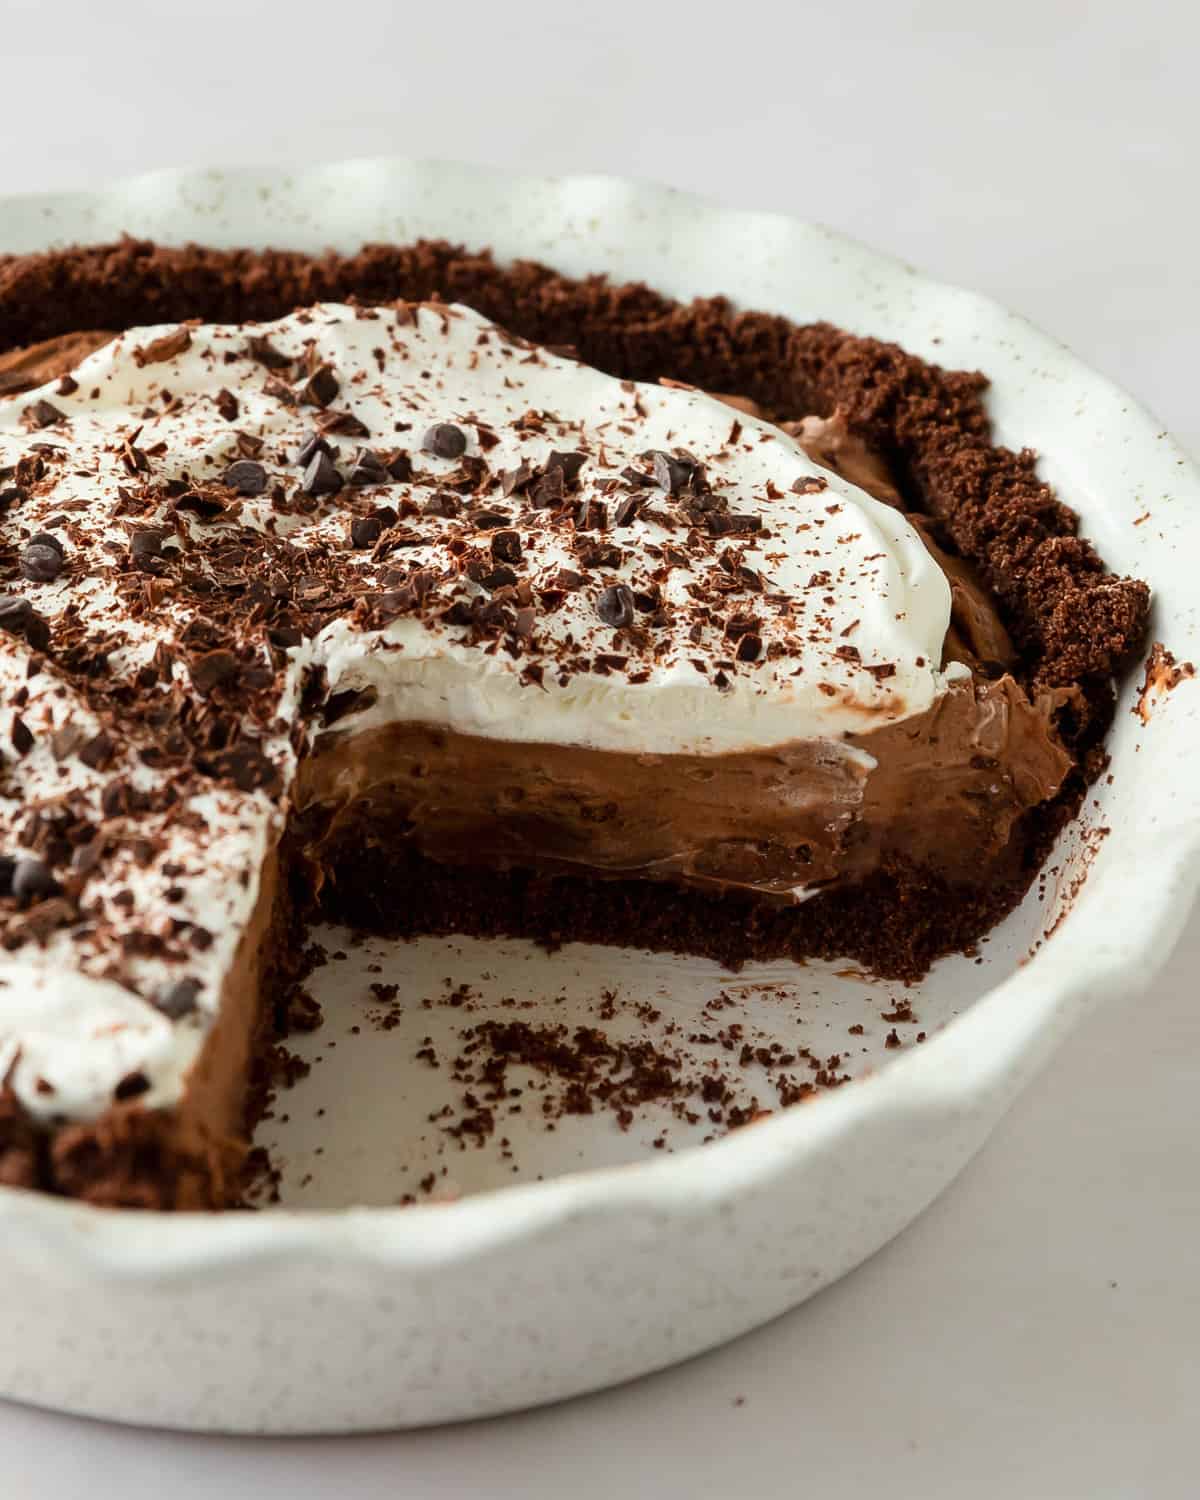 Chocolate pudding pie is a no bake pie made with a chocolate cookie crust topped with a creamy instant chocolate pudding filling, lightly sweetened whipped cream and chocolate shavings. Enjoy this jello pudding pie the next time you need a deliciously decadent, quick and easy dessert everyone will love. 